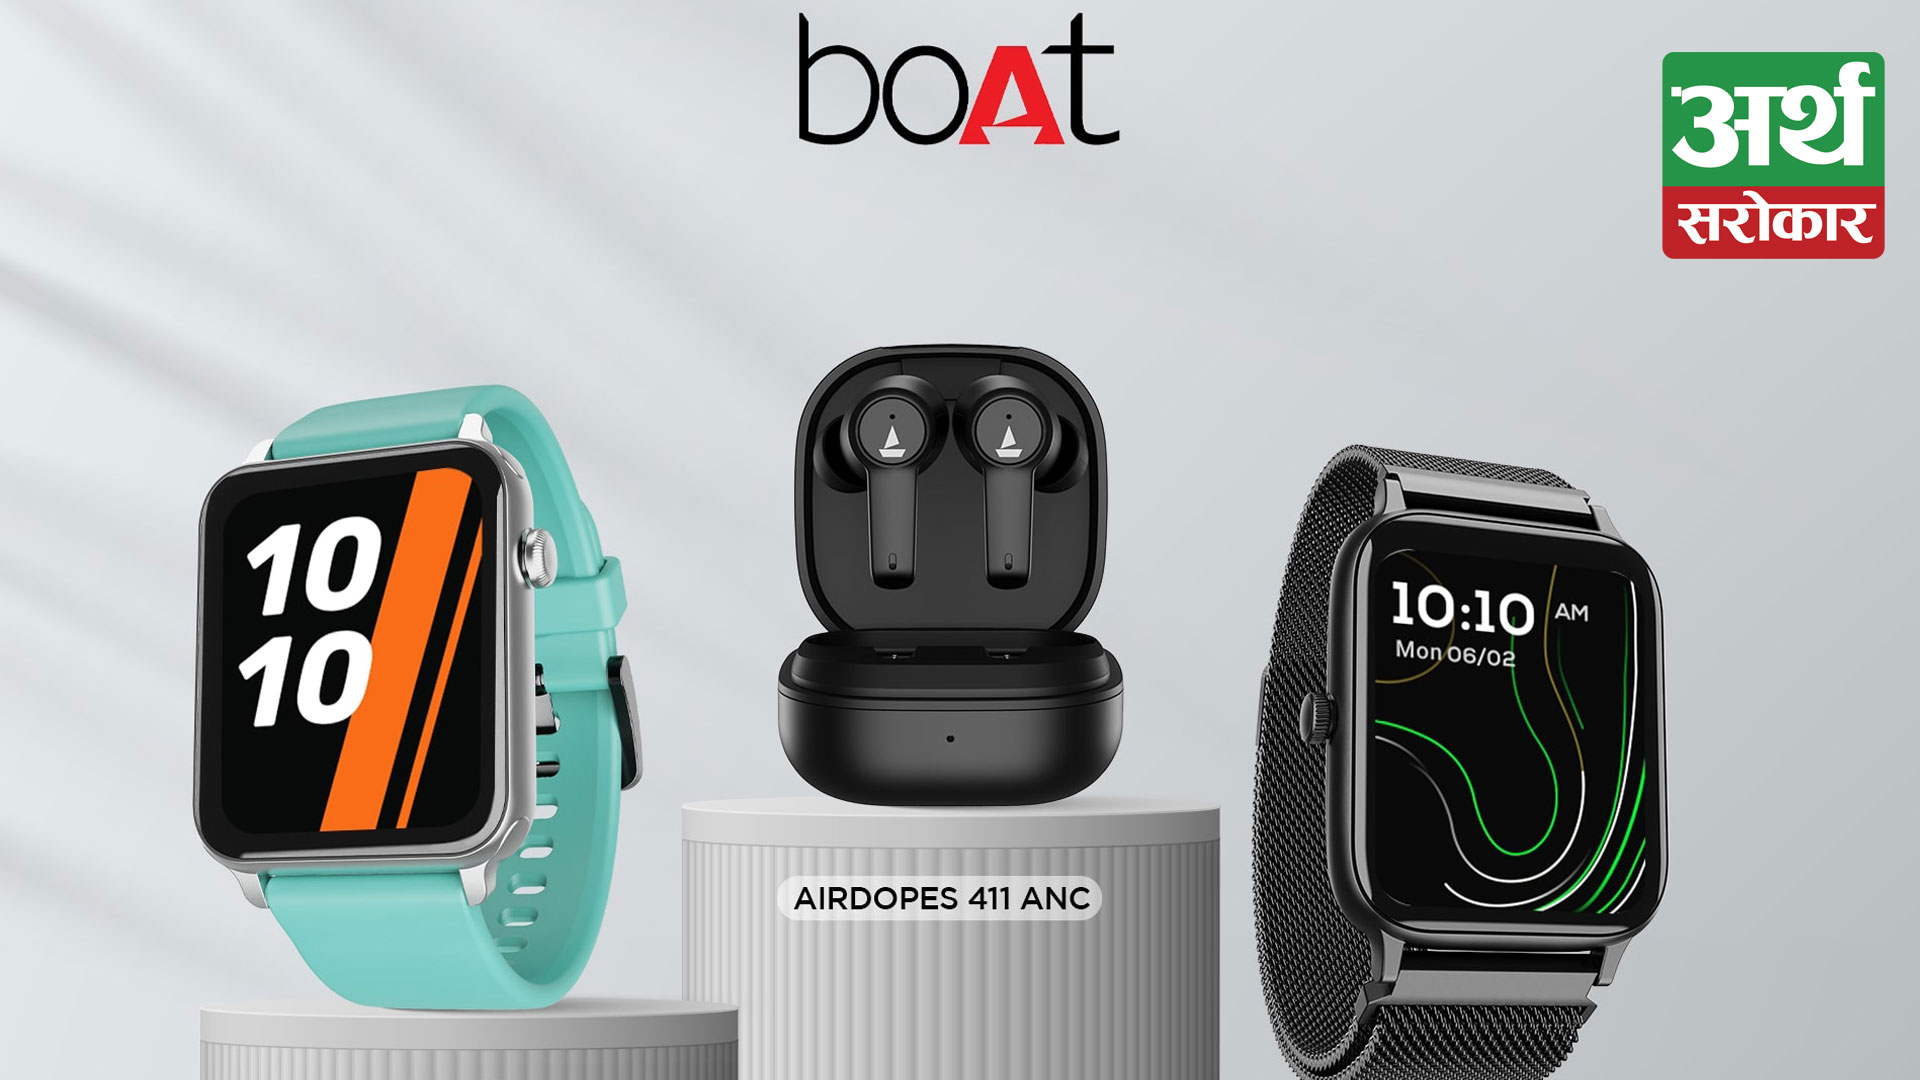 boAt expand their Nepal portfolio, introduce their latest Bluetooth calling smartwatches